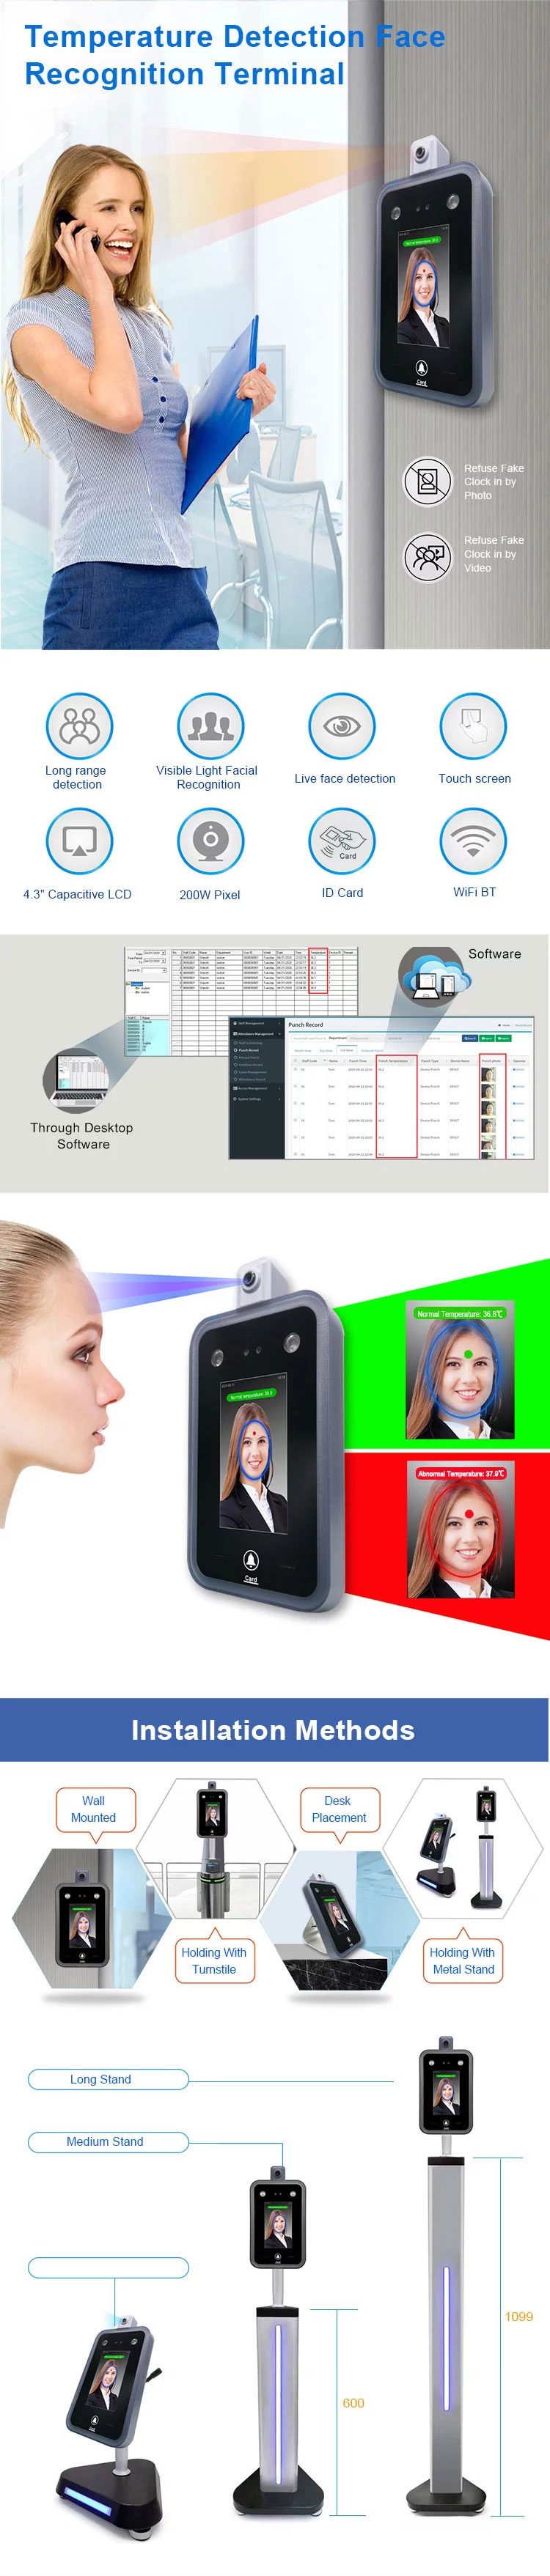 facial recognition security system